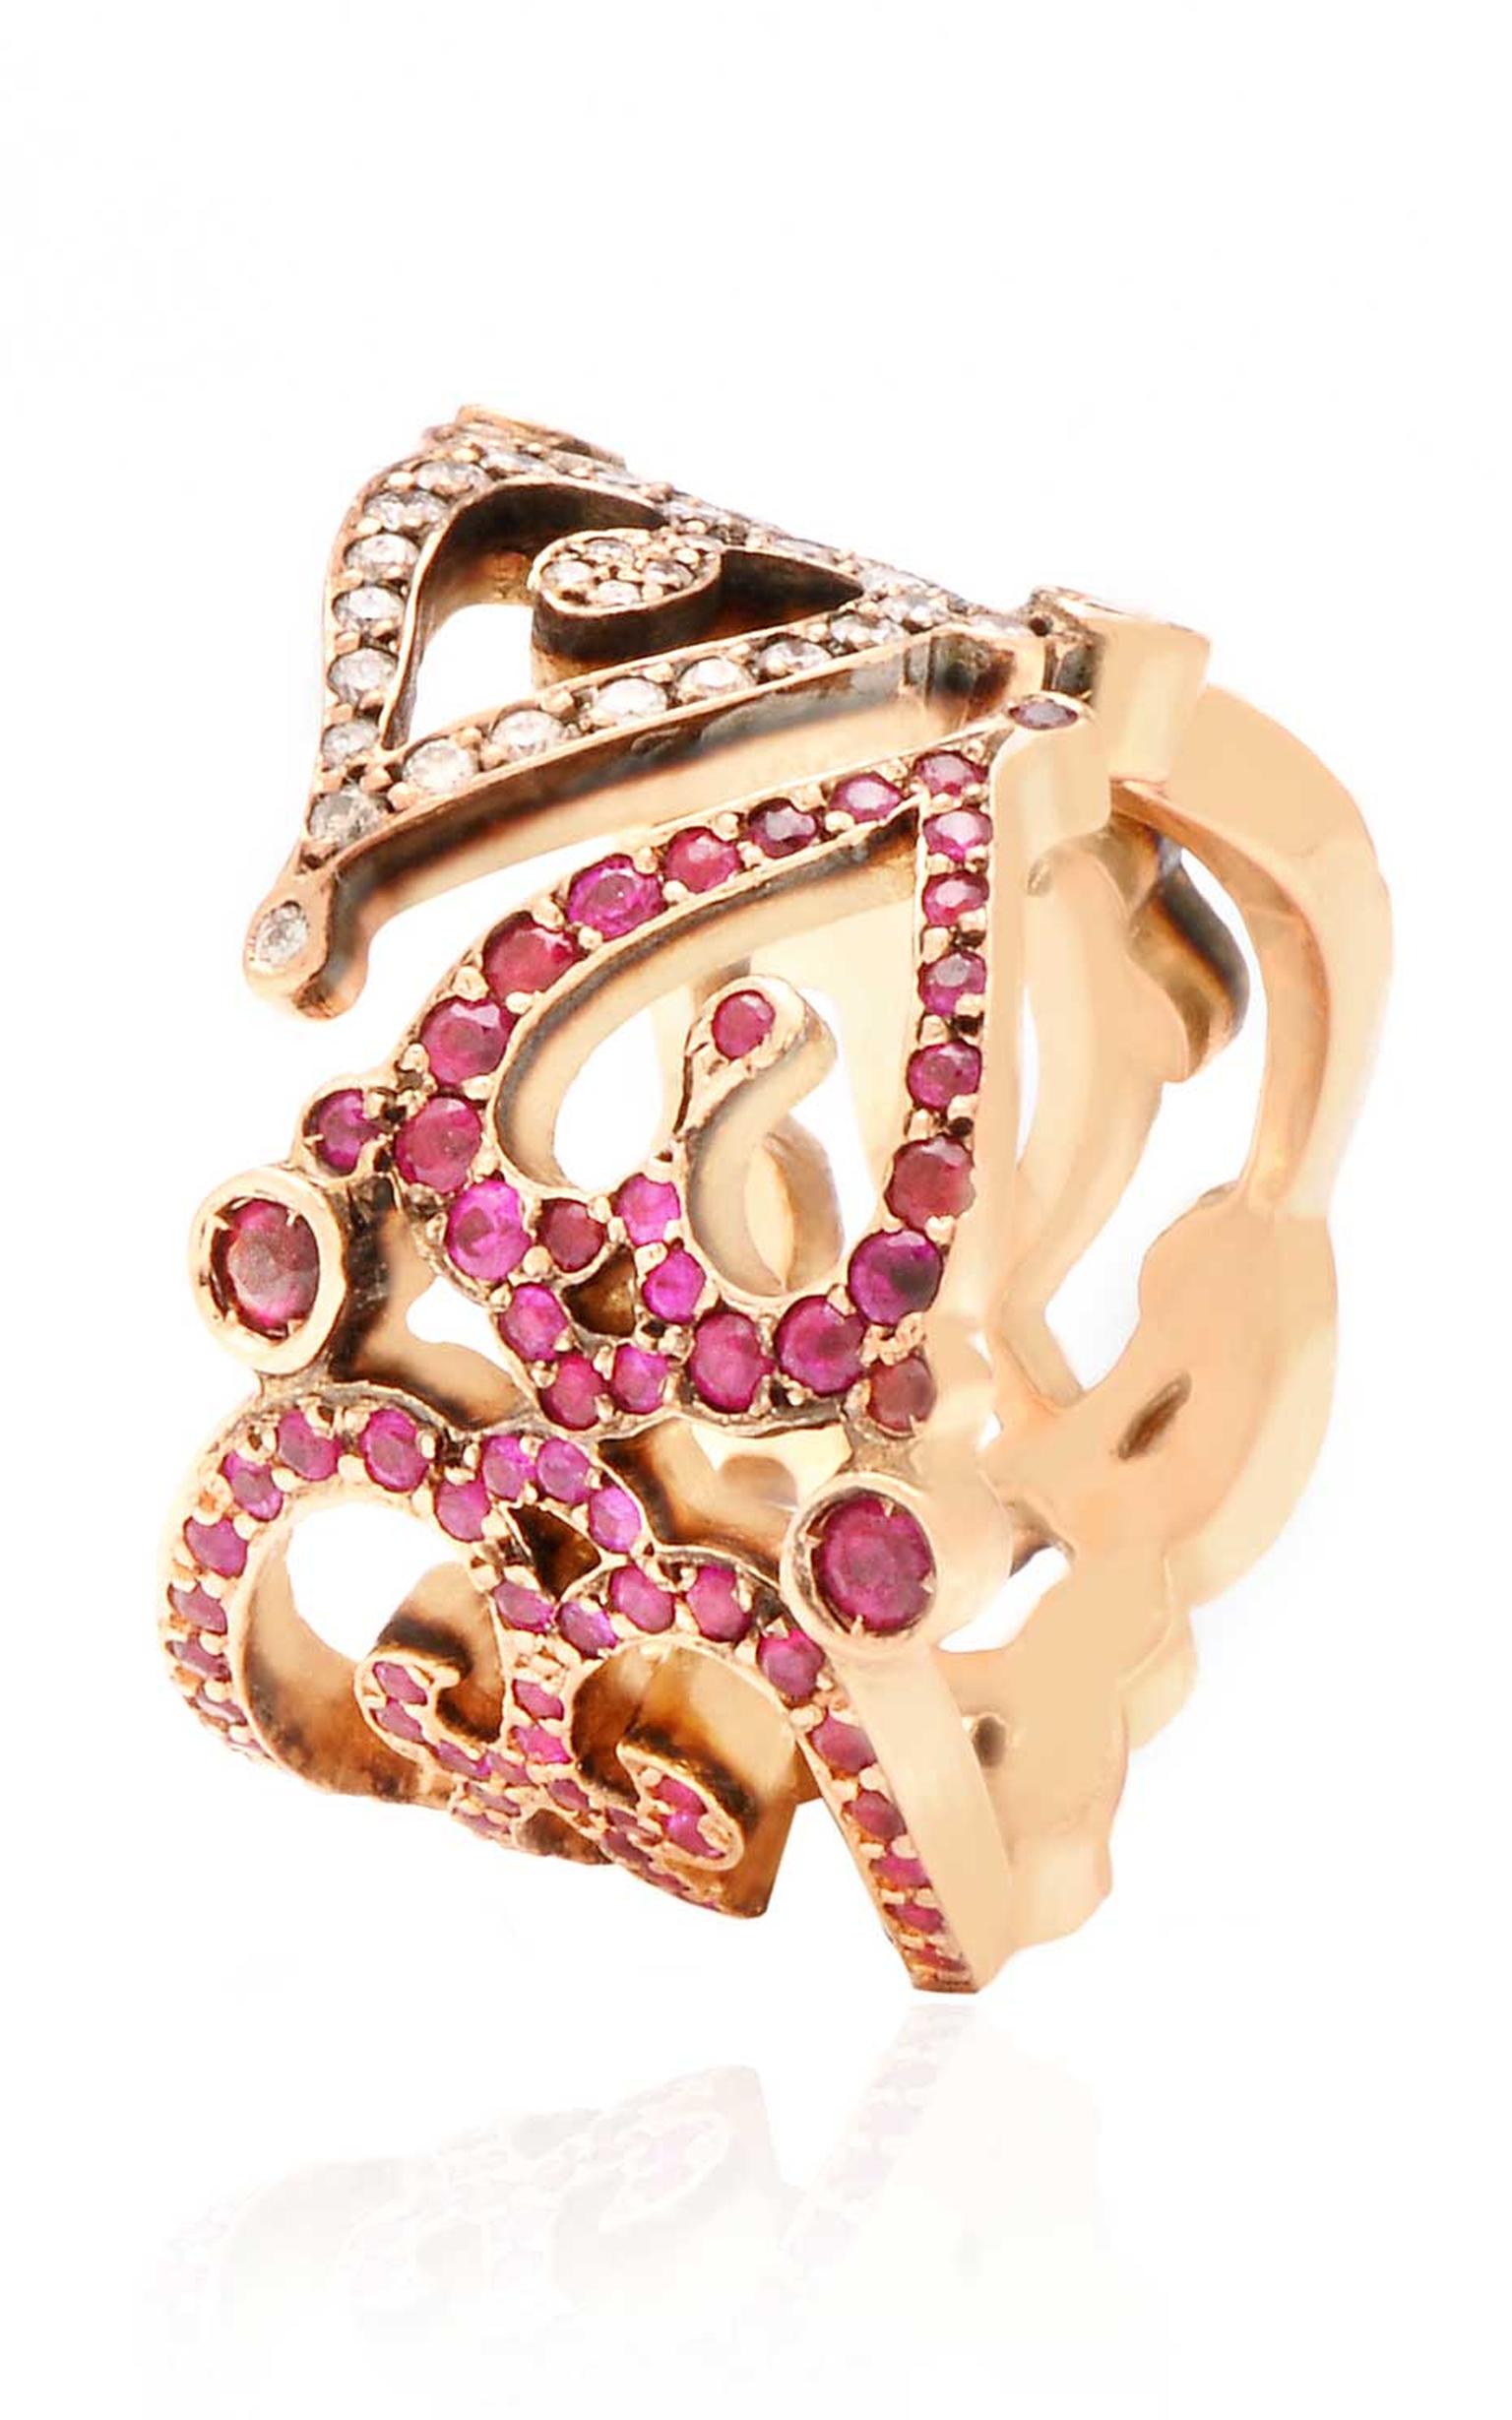 Sabine G Love ring in pink gold with white diamonds and rubies.